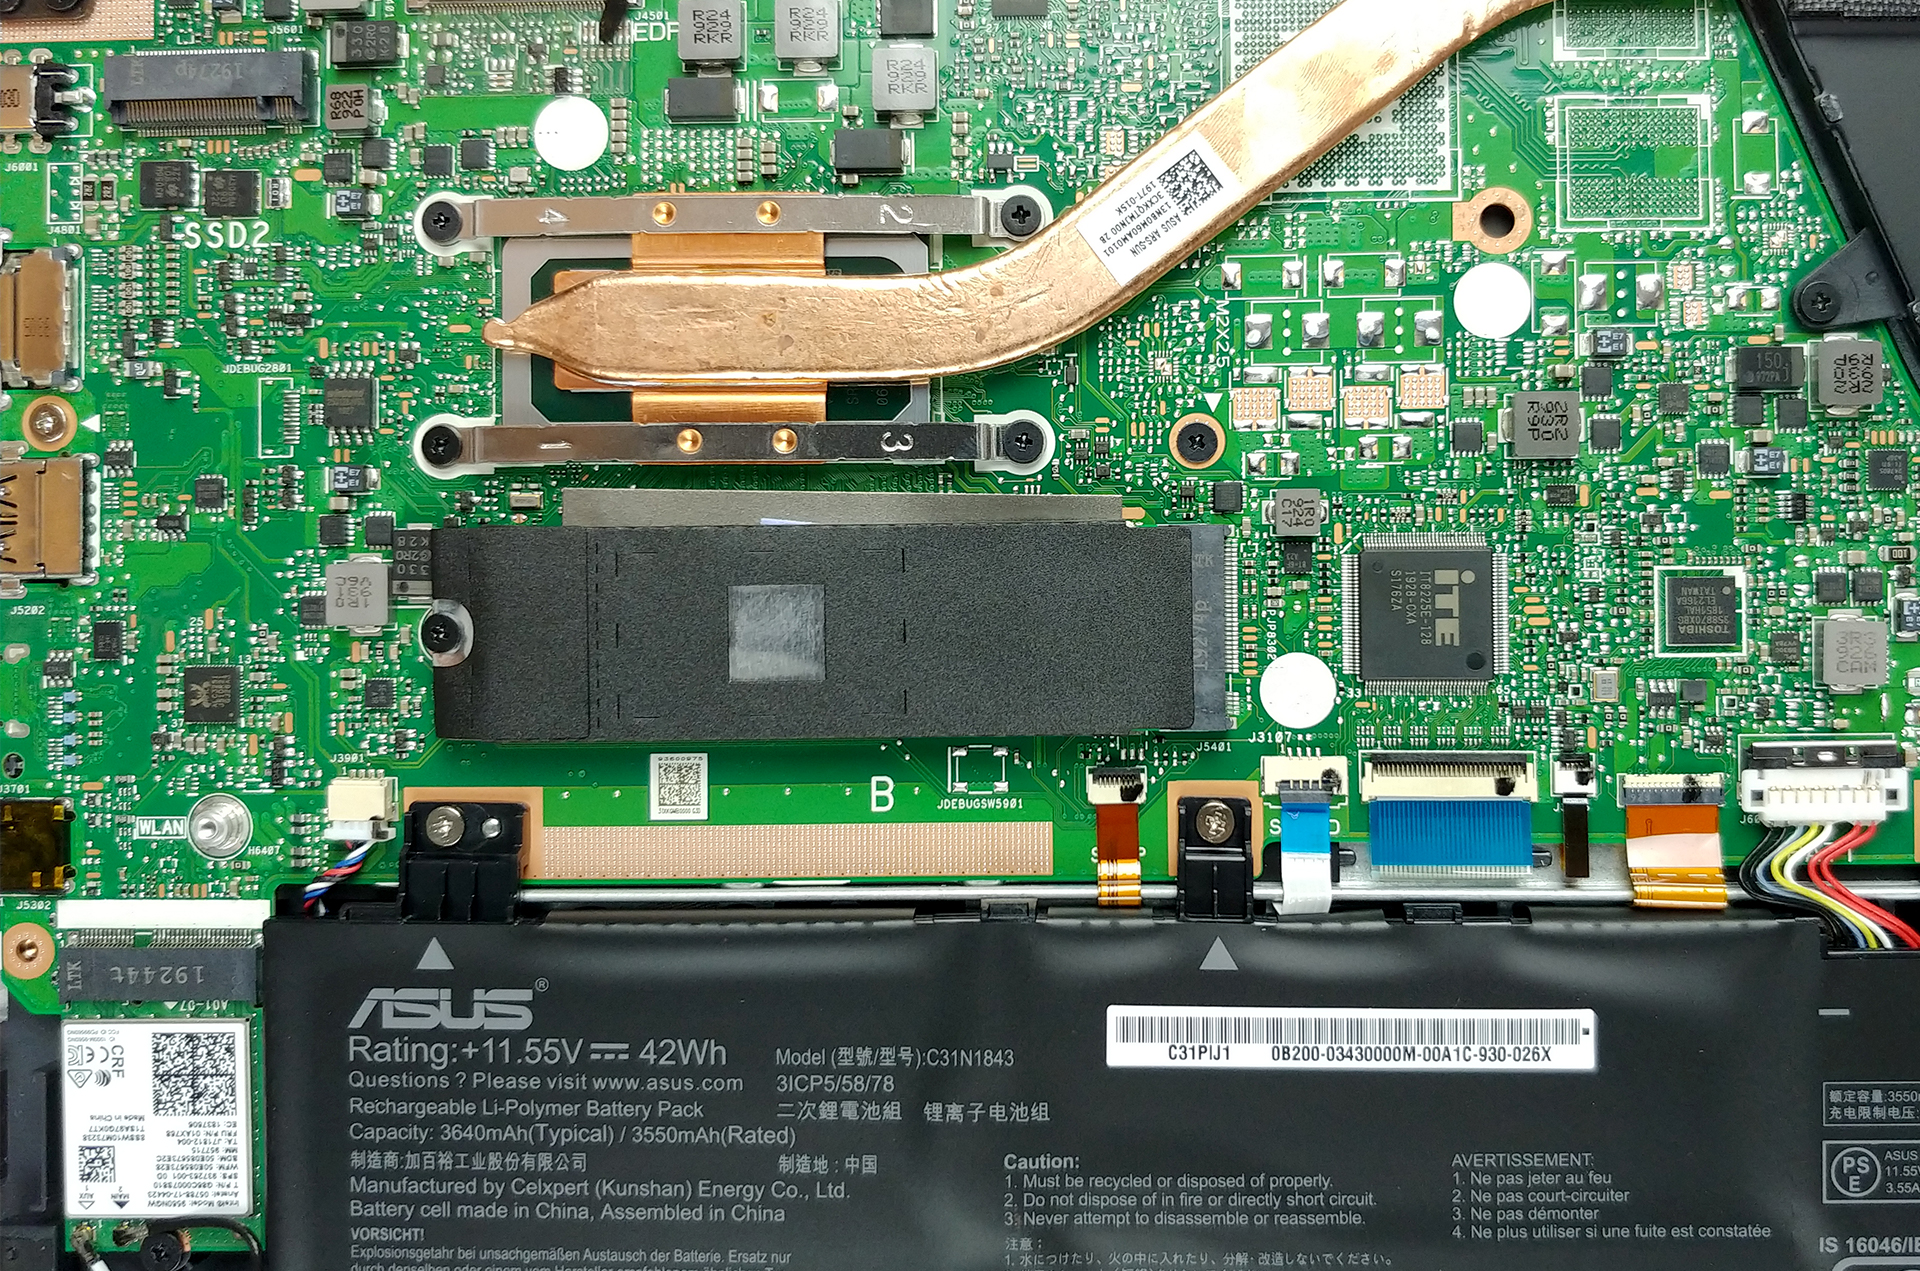 Inside ASUS VivoBook S14 - disassembly and upgrade options | LaptopMedia.com